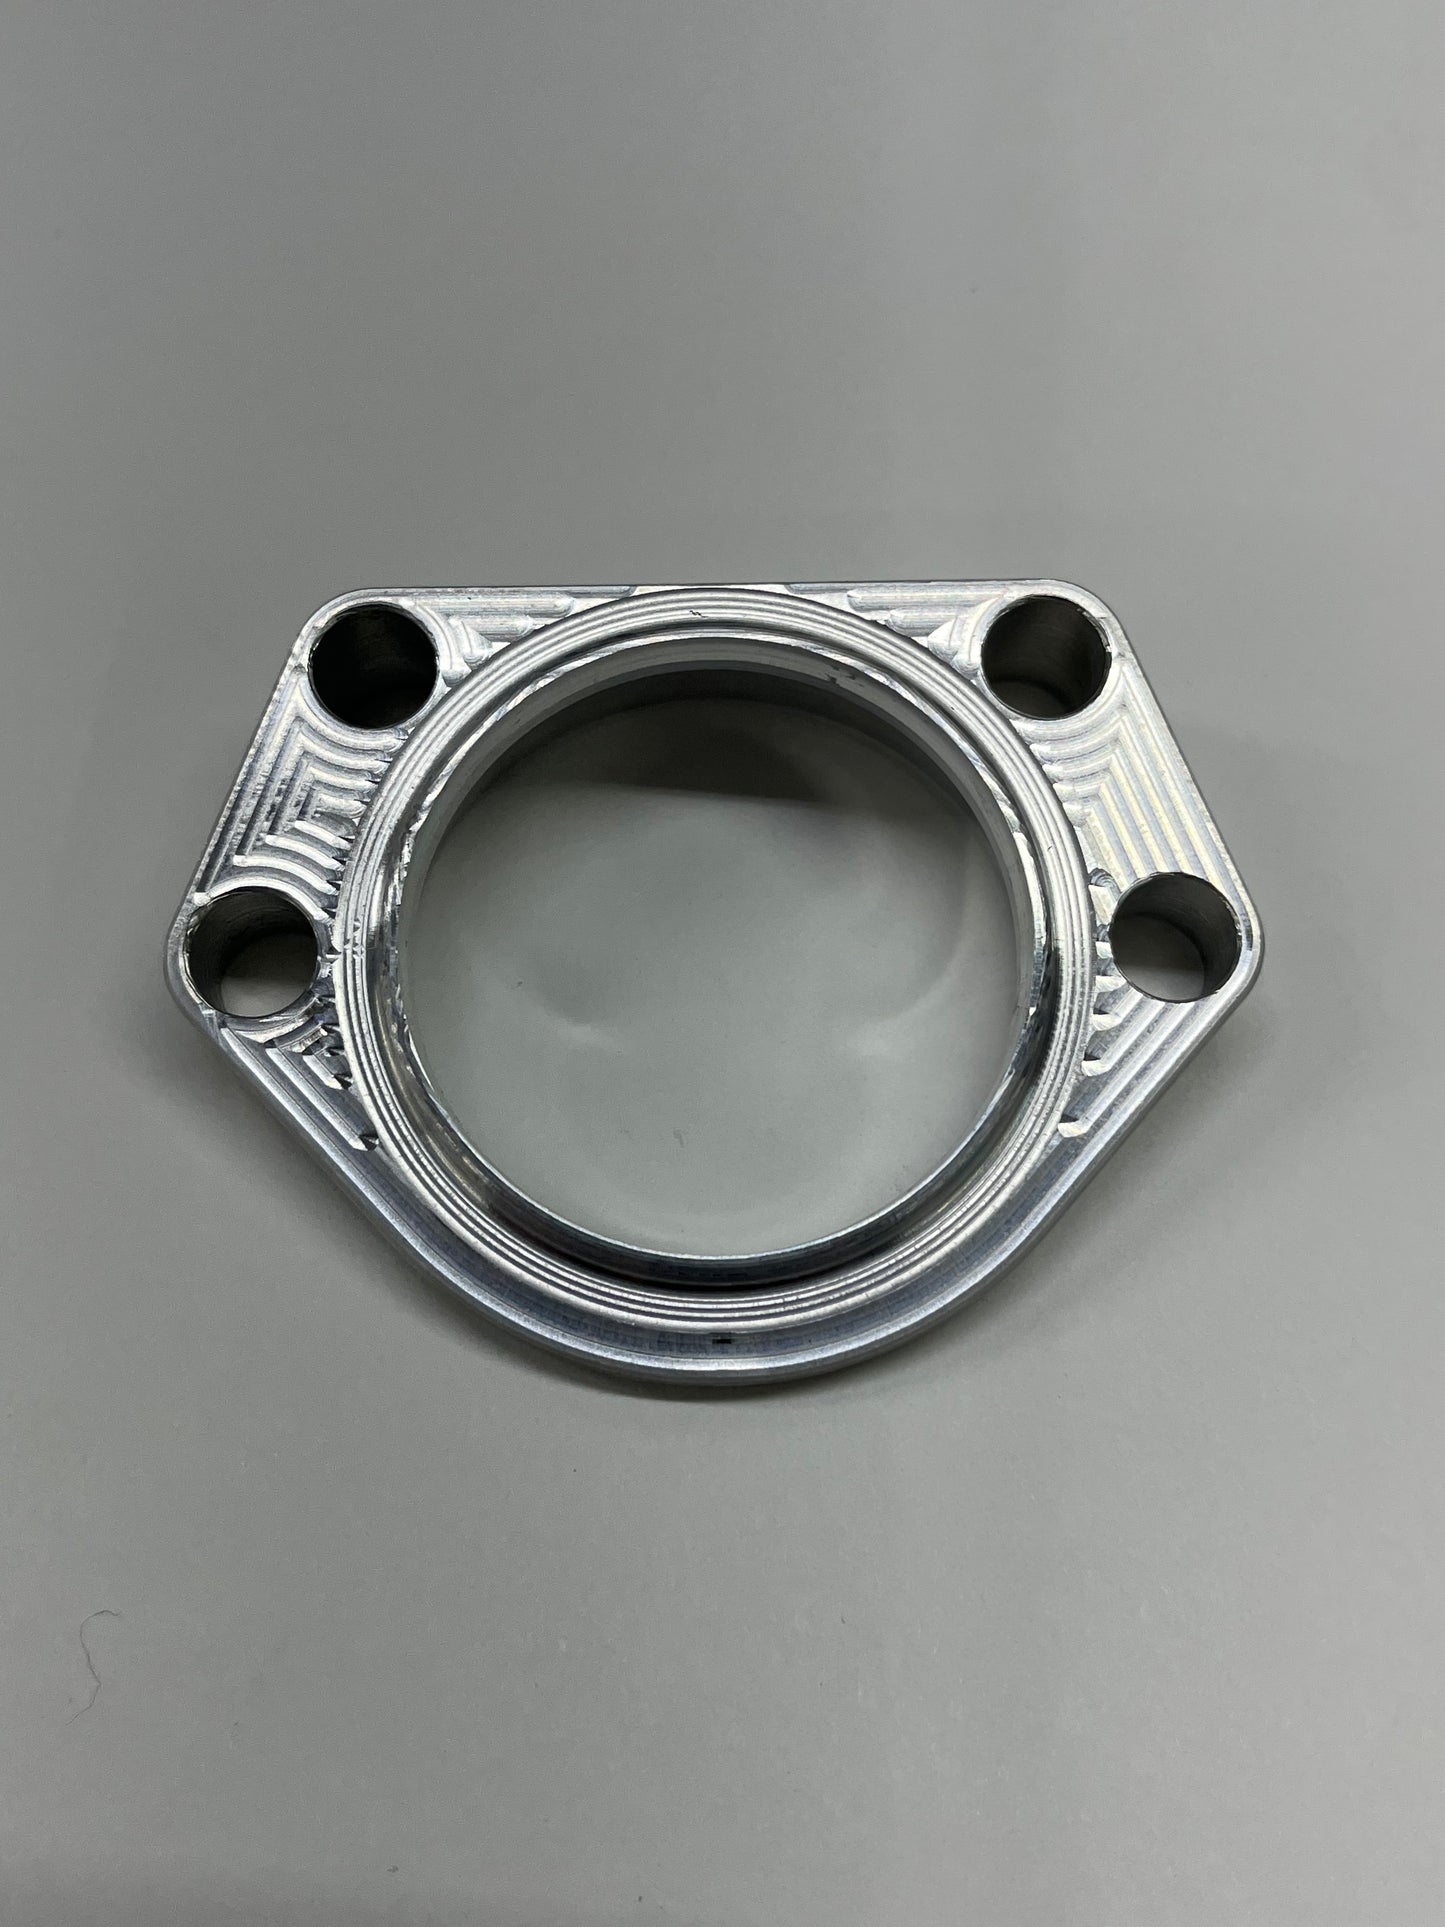 Billet Ball Joint Spacers / Angle Shims (Pair)